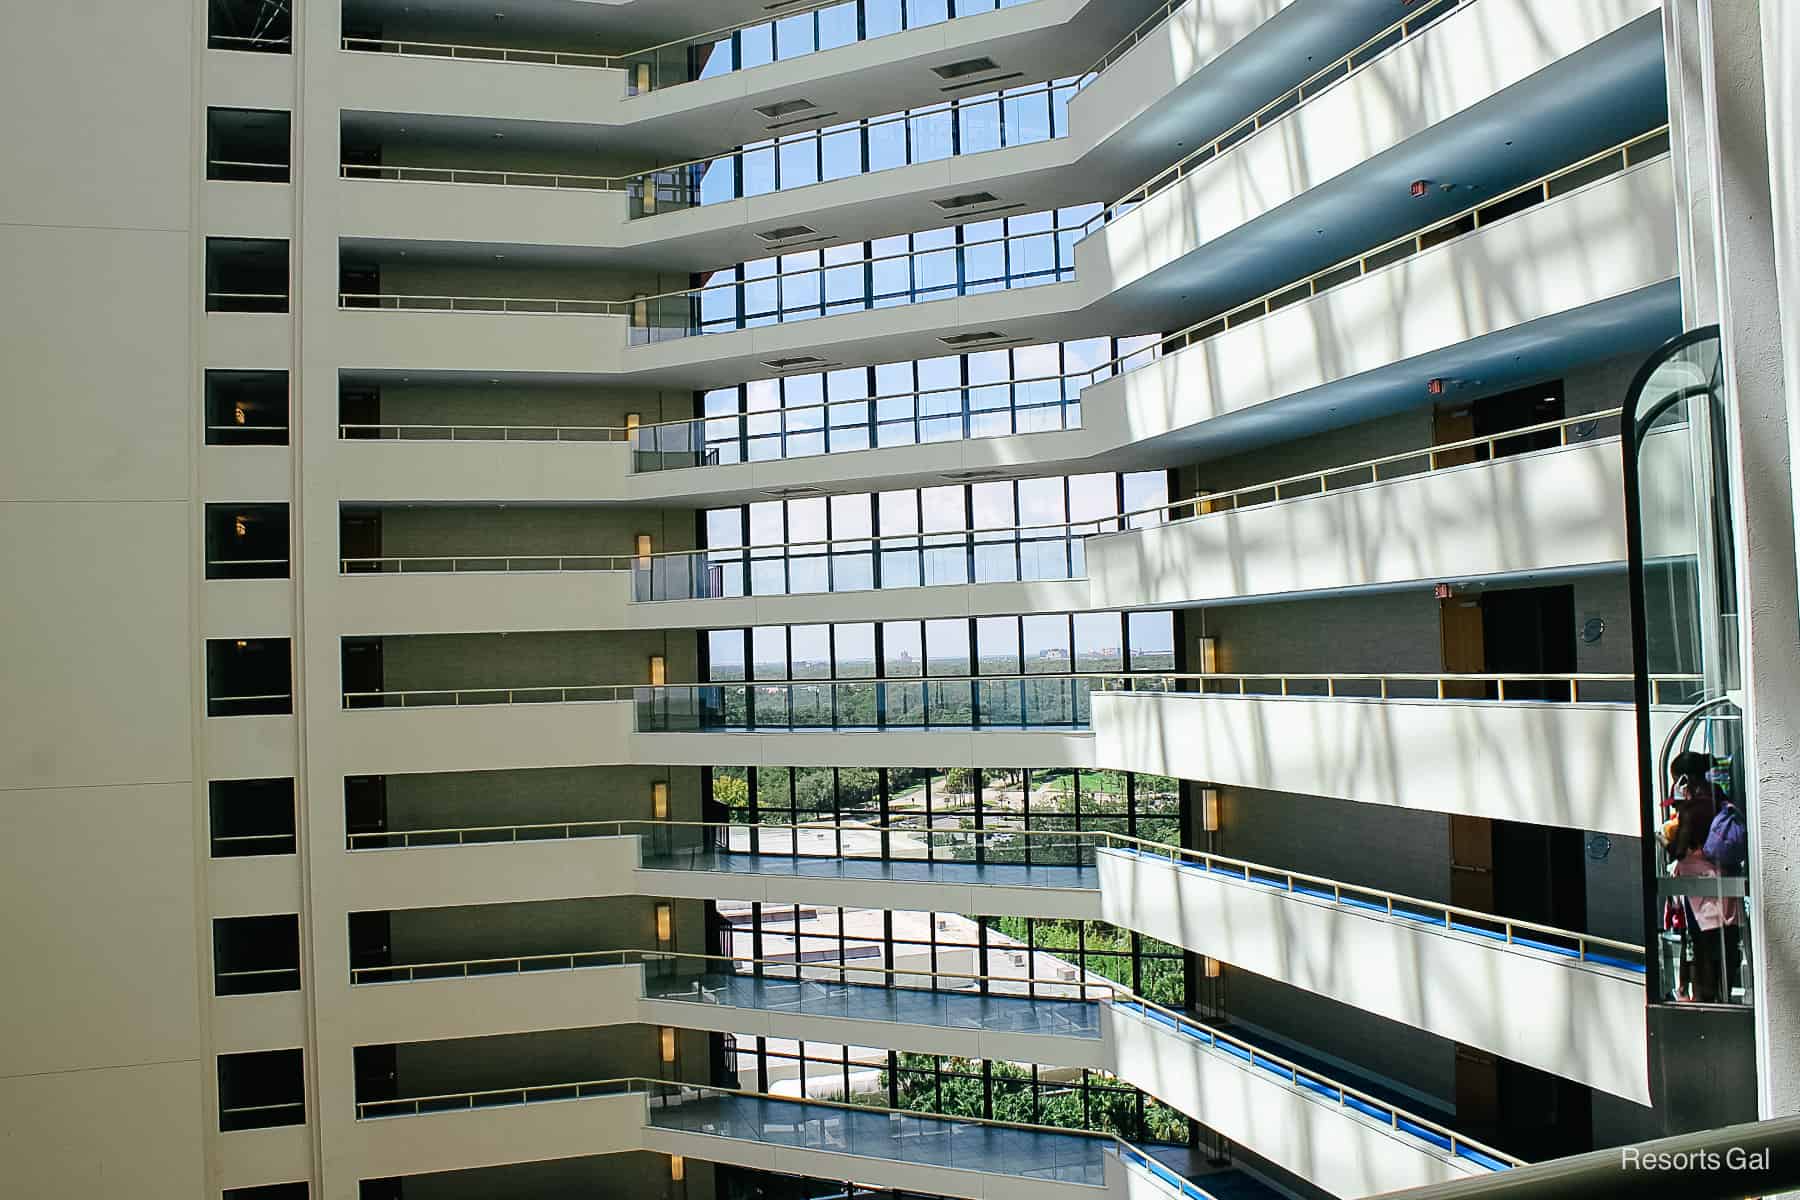 different levels and interior balconies in the Hyatt Grand Cypress